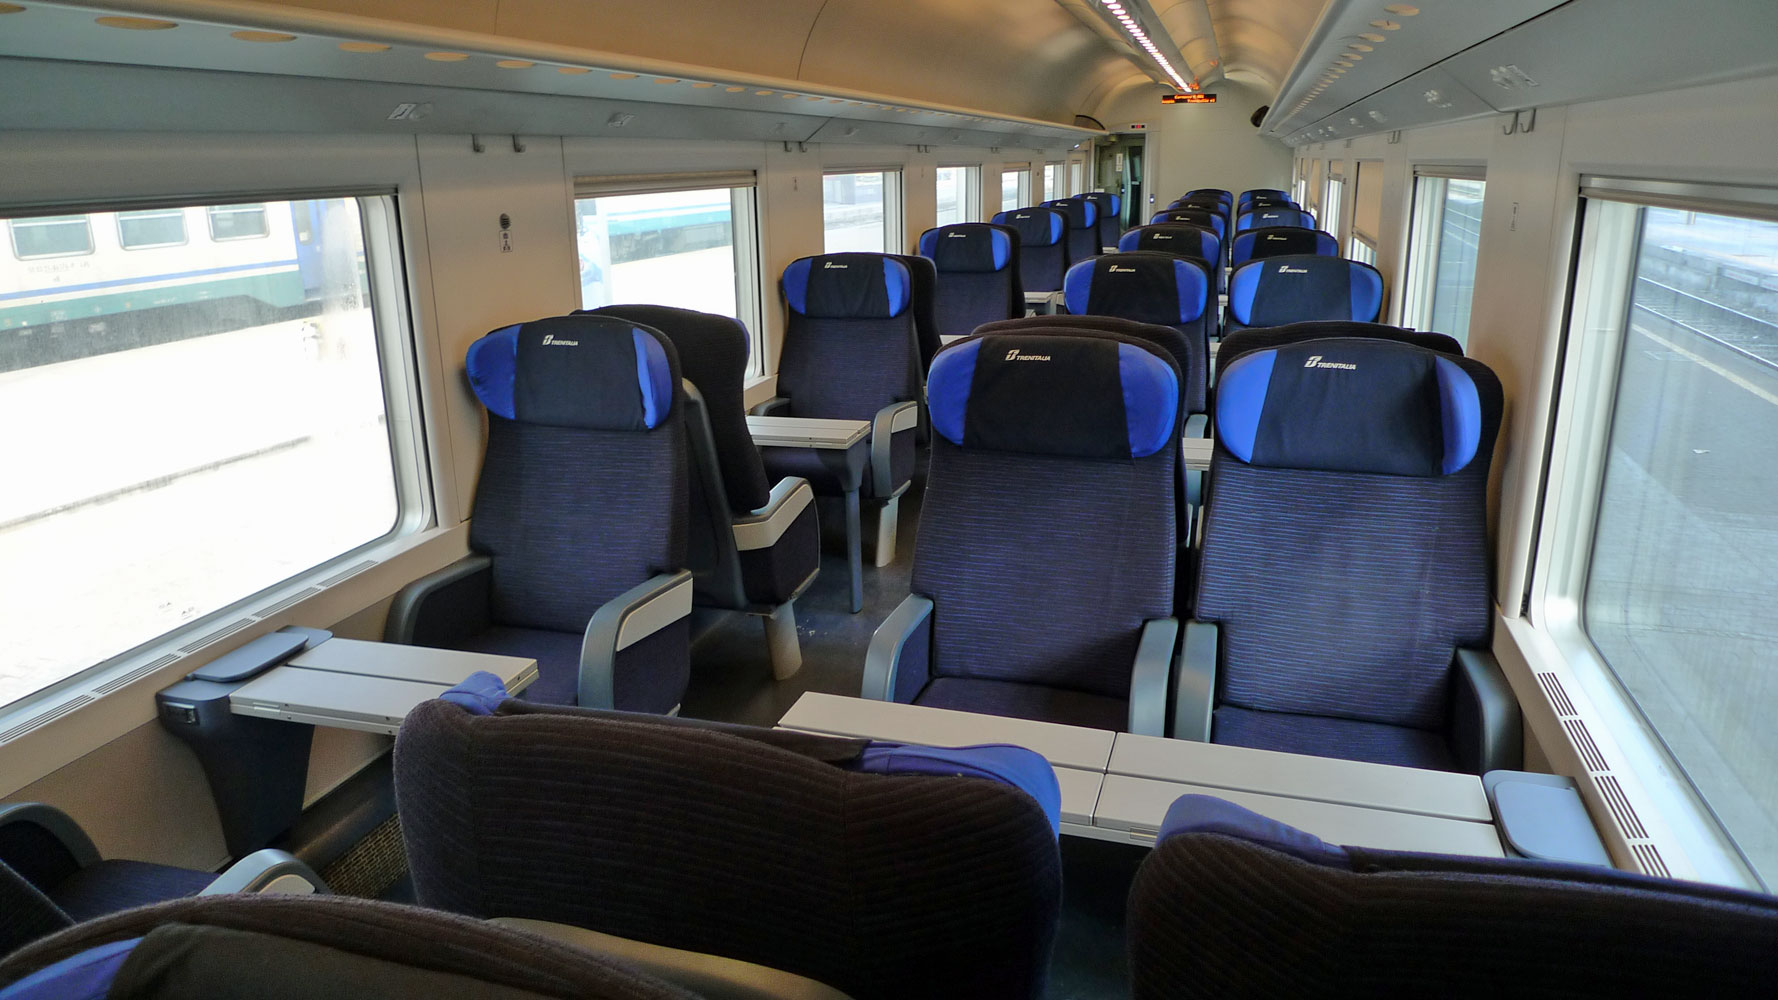 Frecciargento Seating Chart